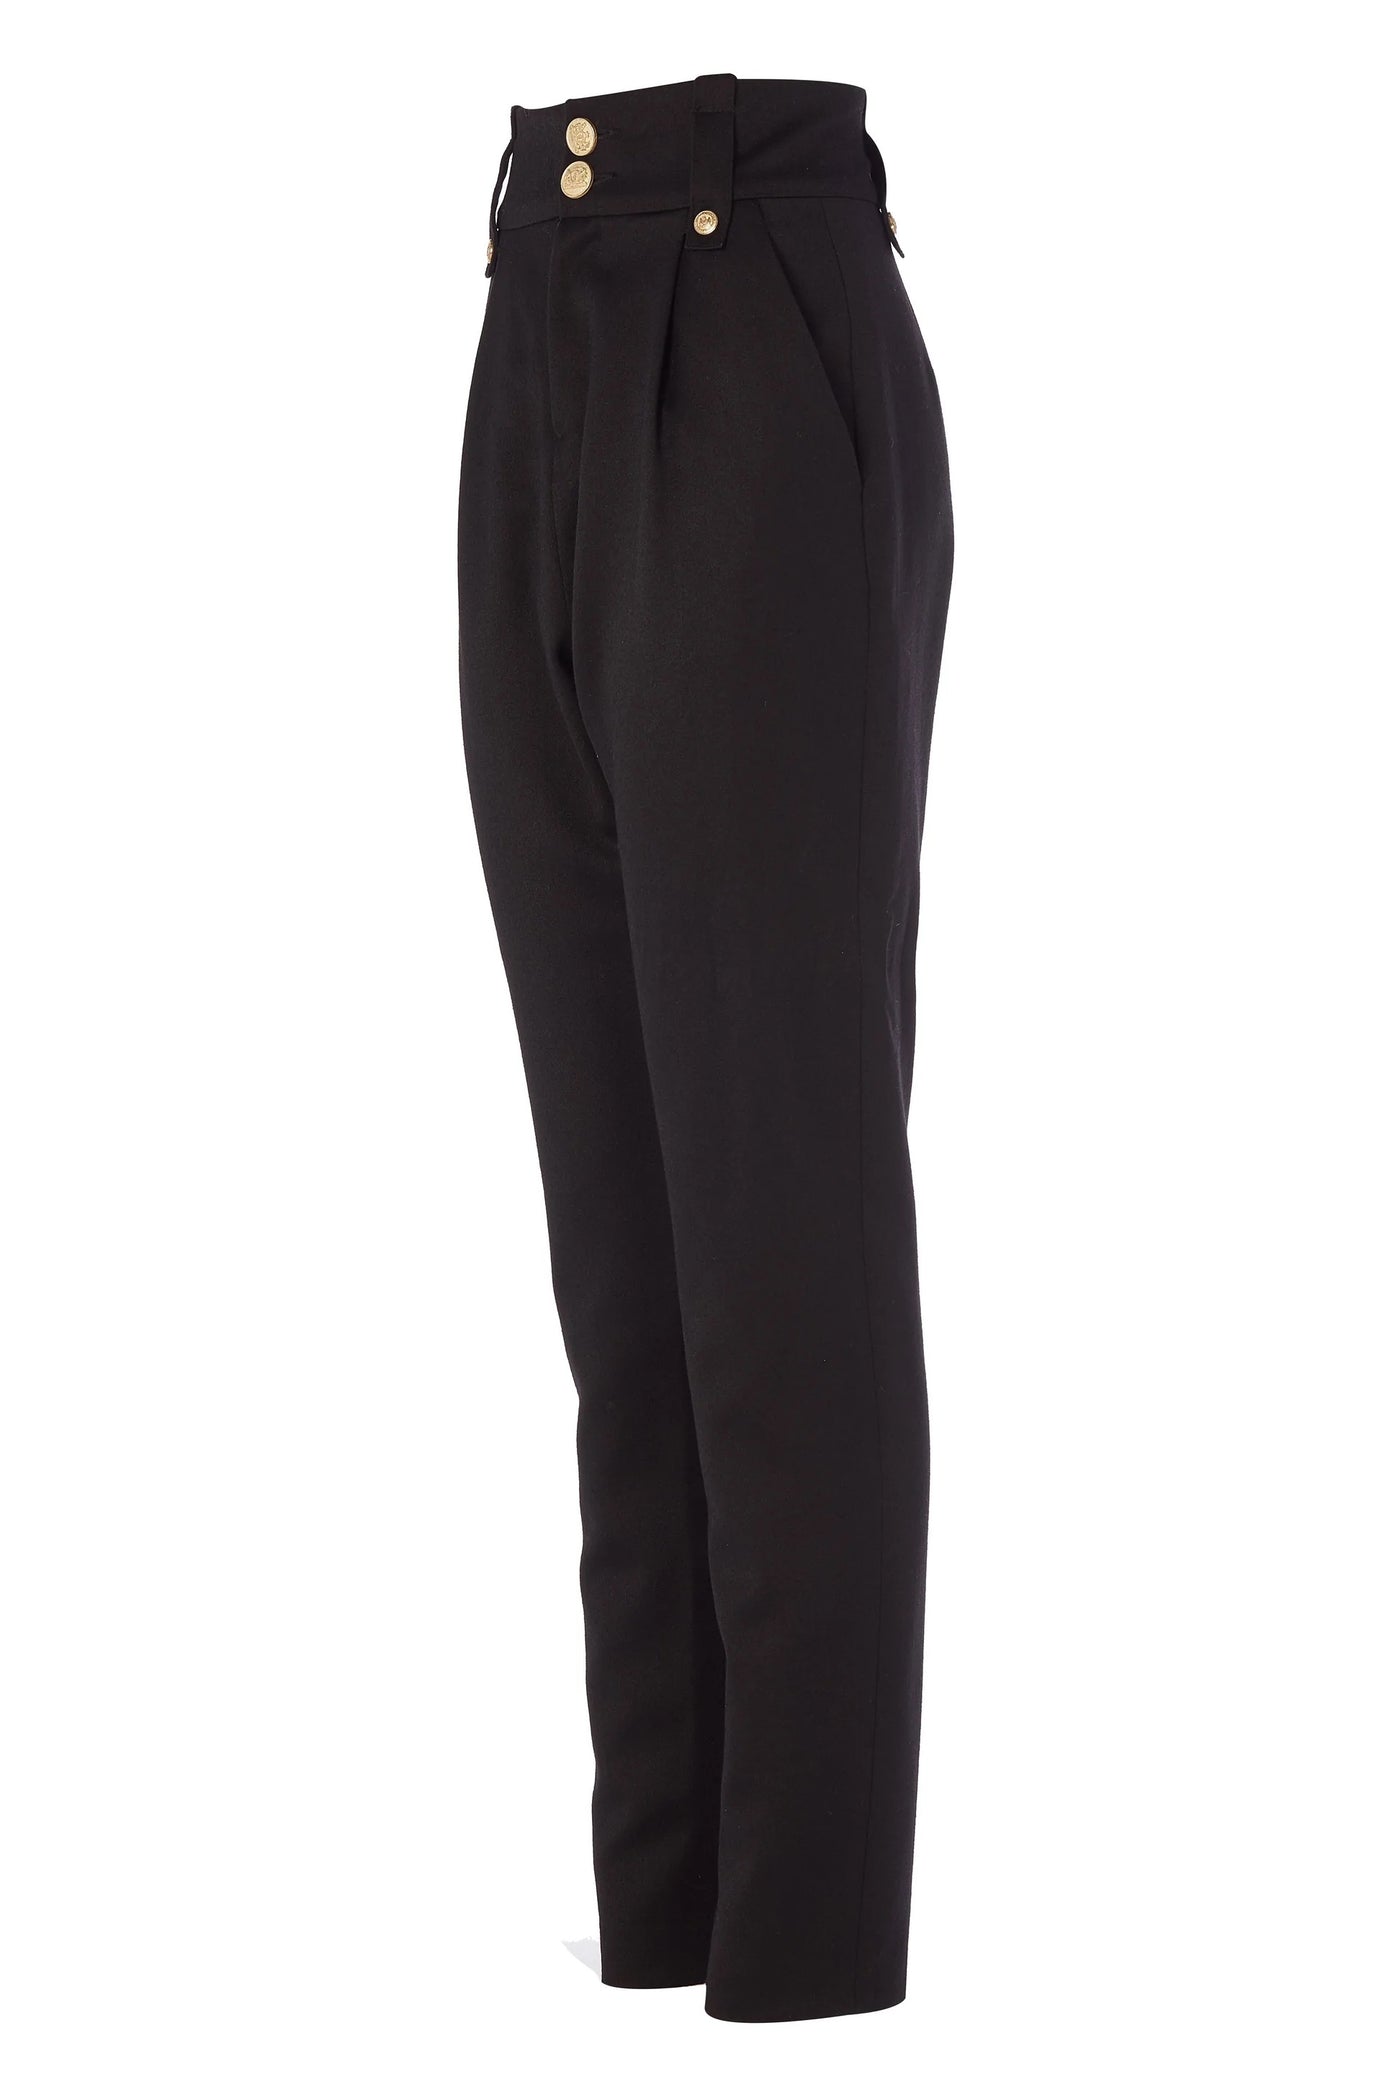 Holland Cooper High Waisted Peg Trouser in Black Barathea Angle